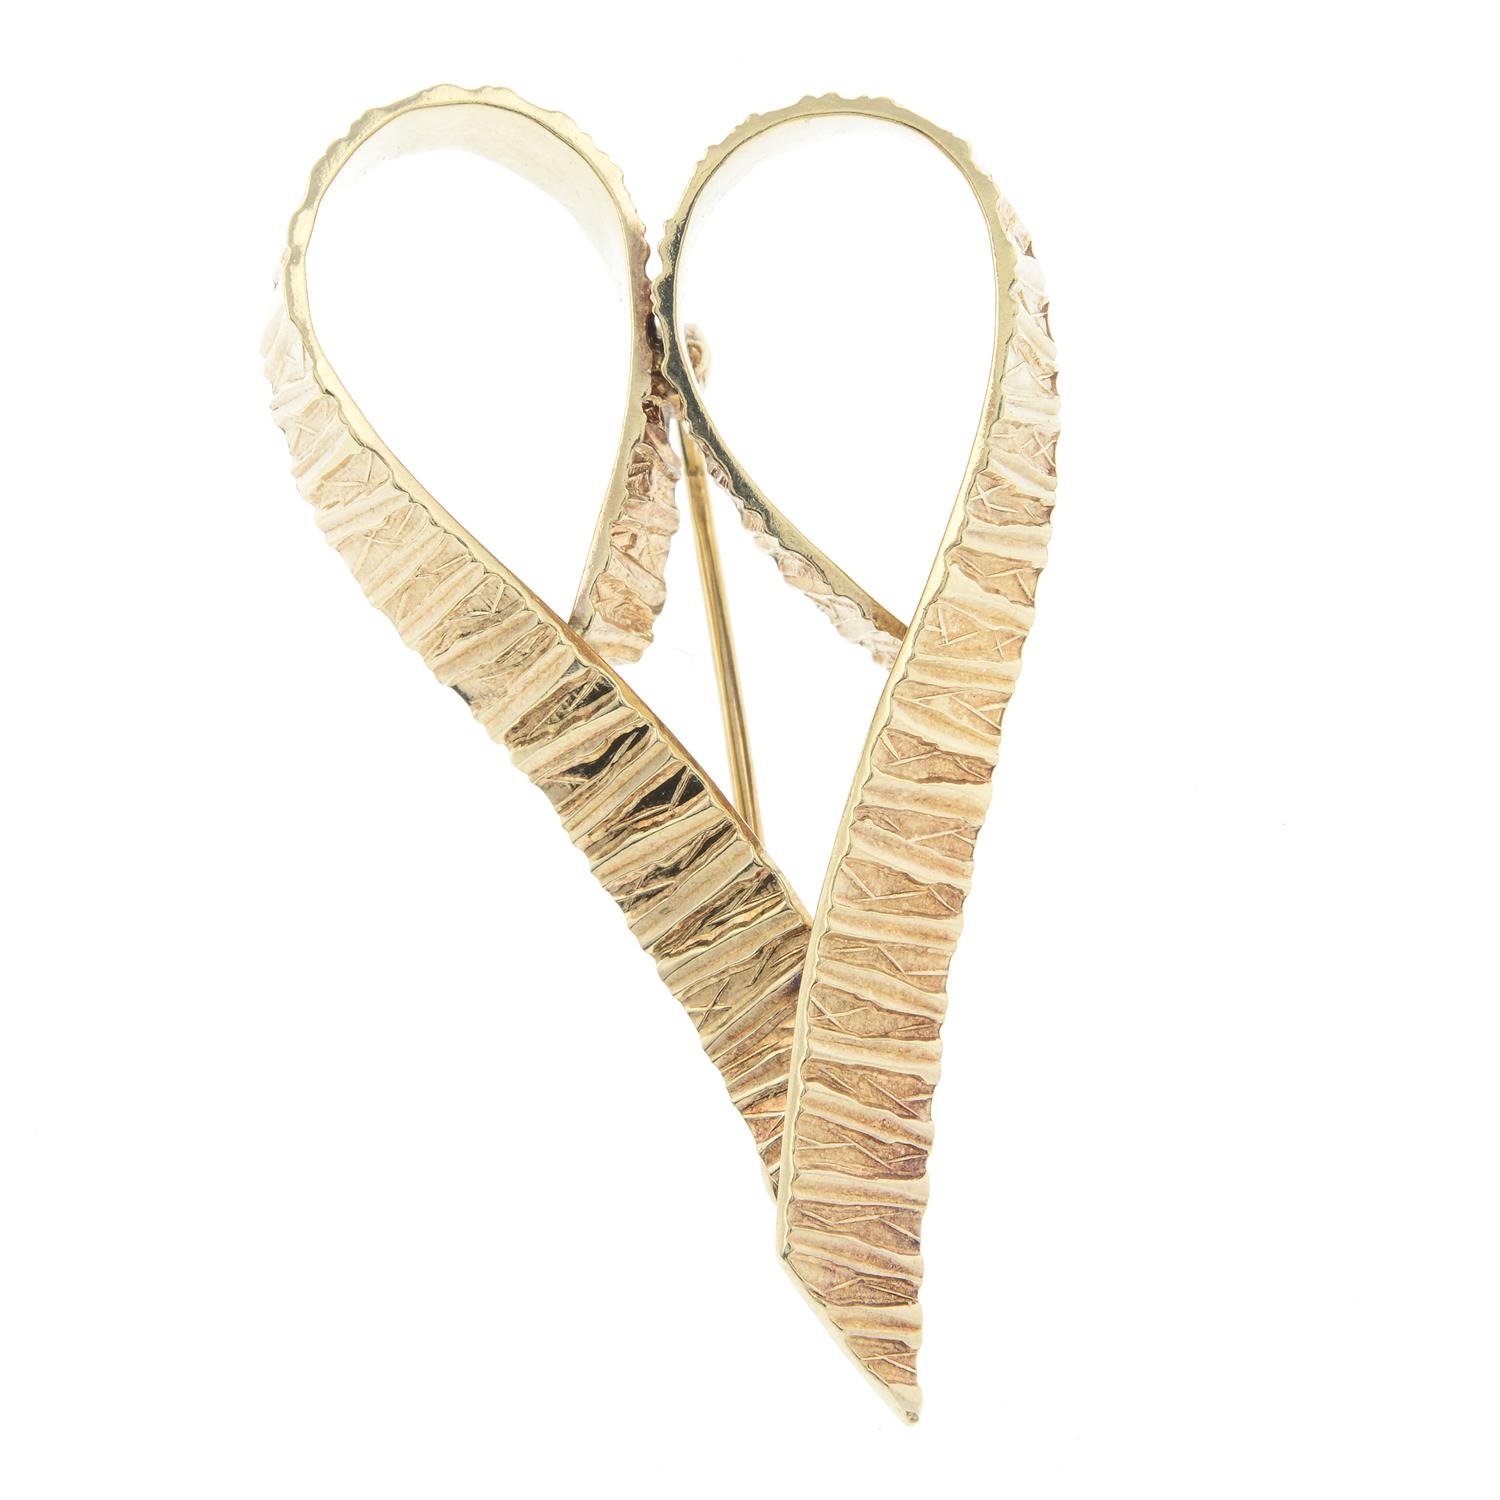 A 9ct gold textured stylised heart brooch.